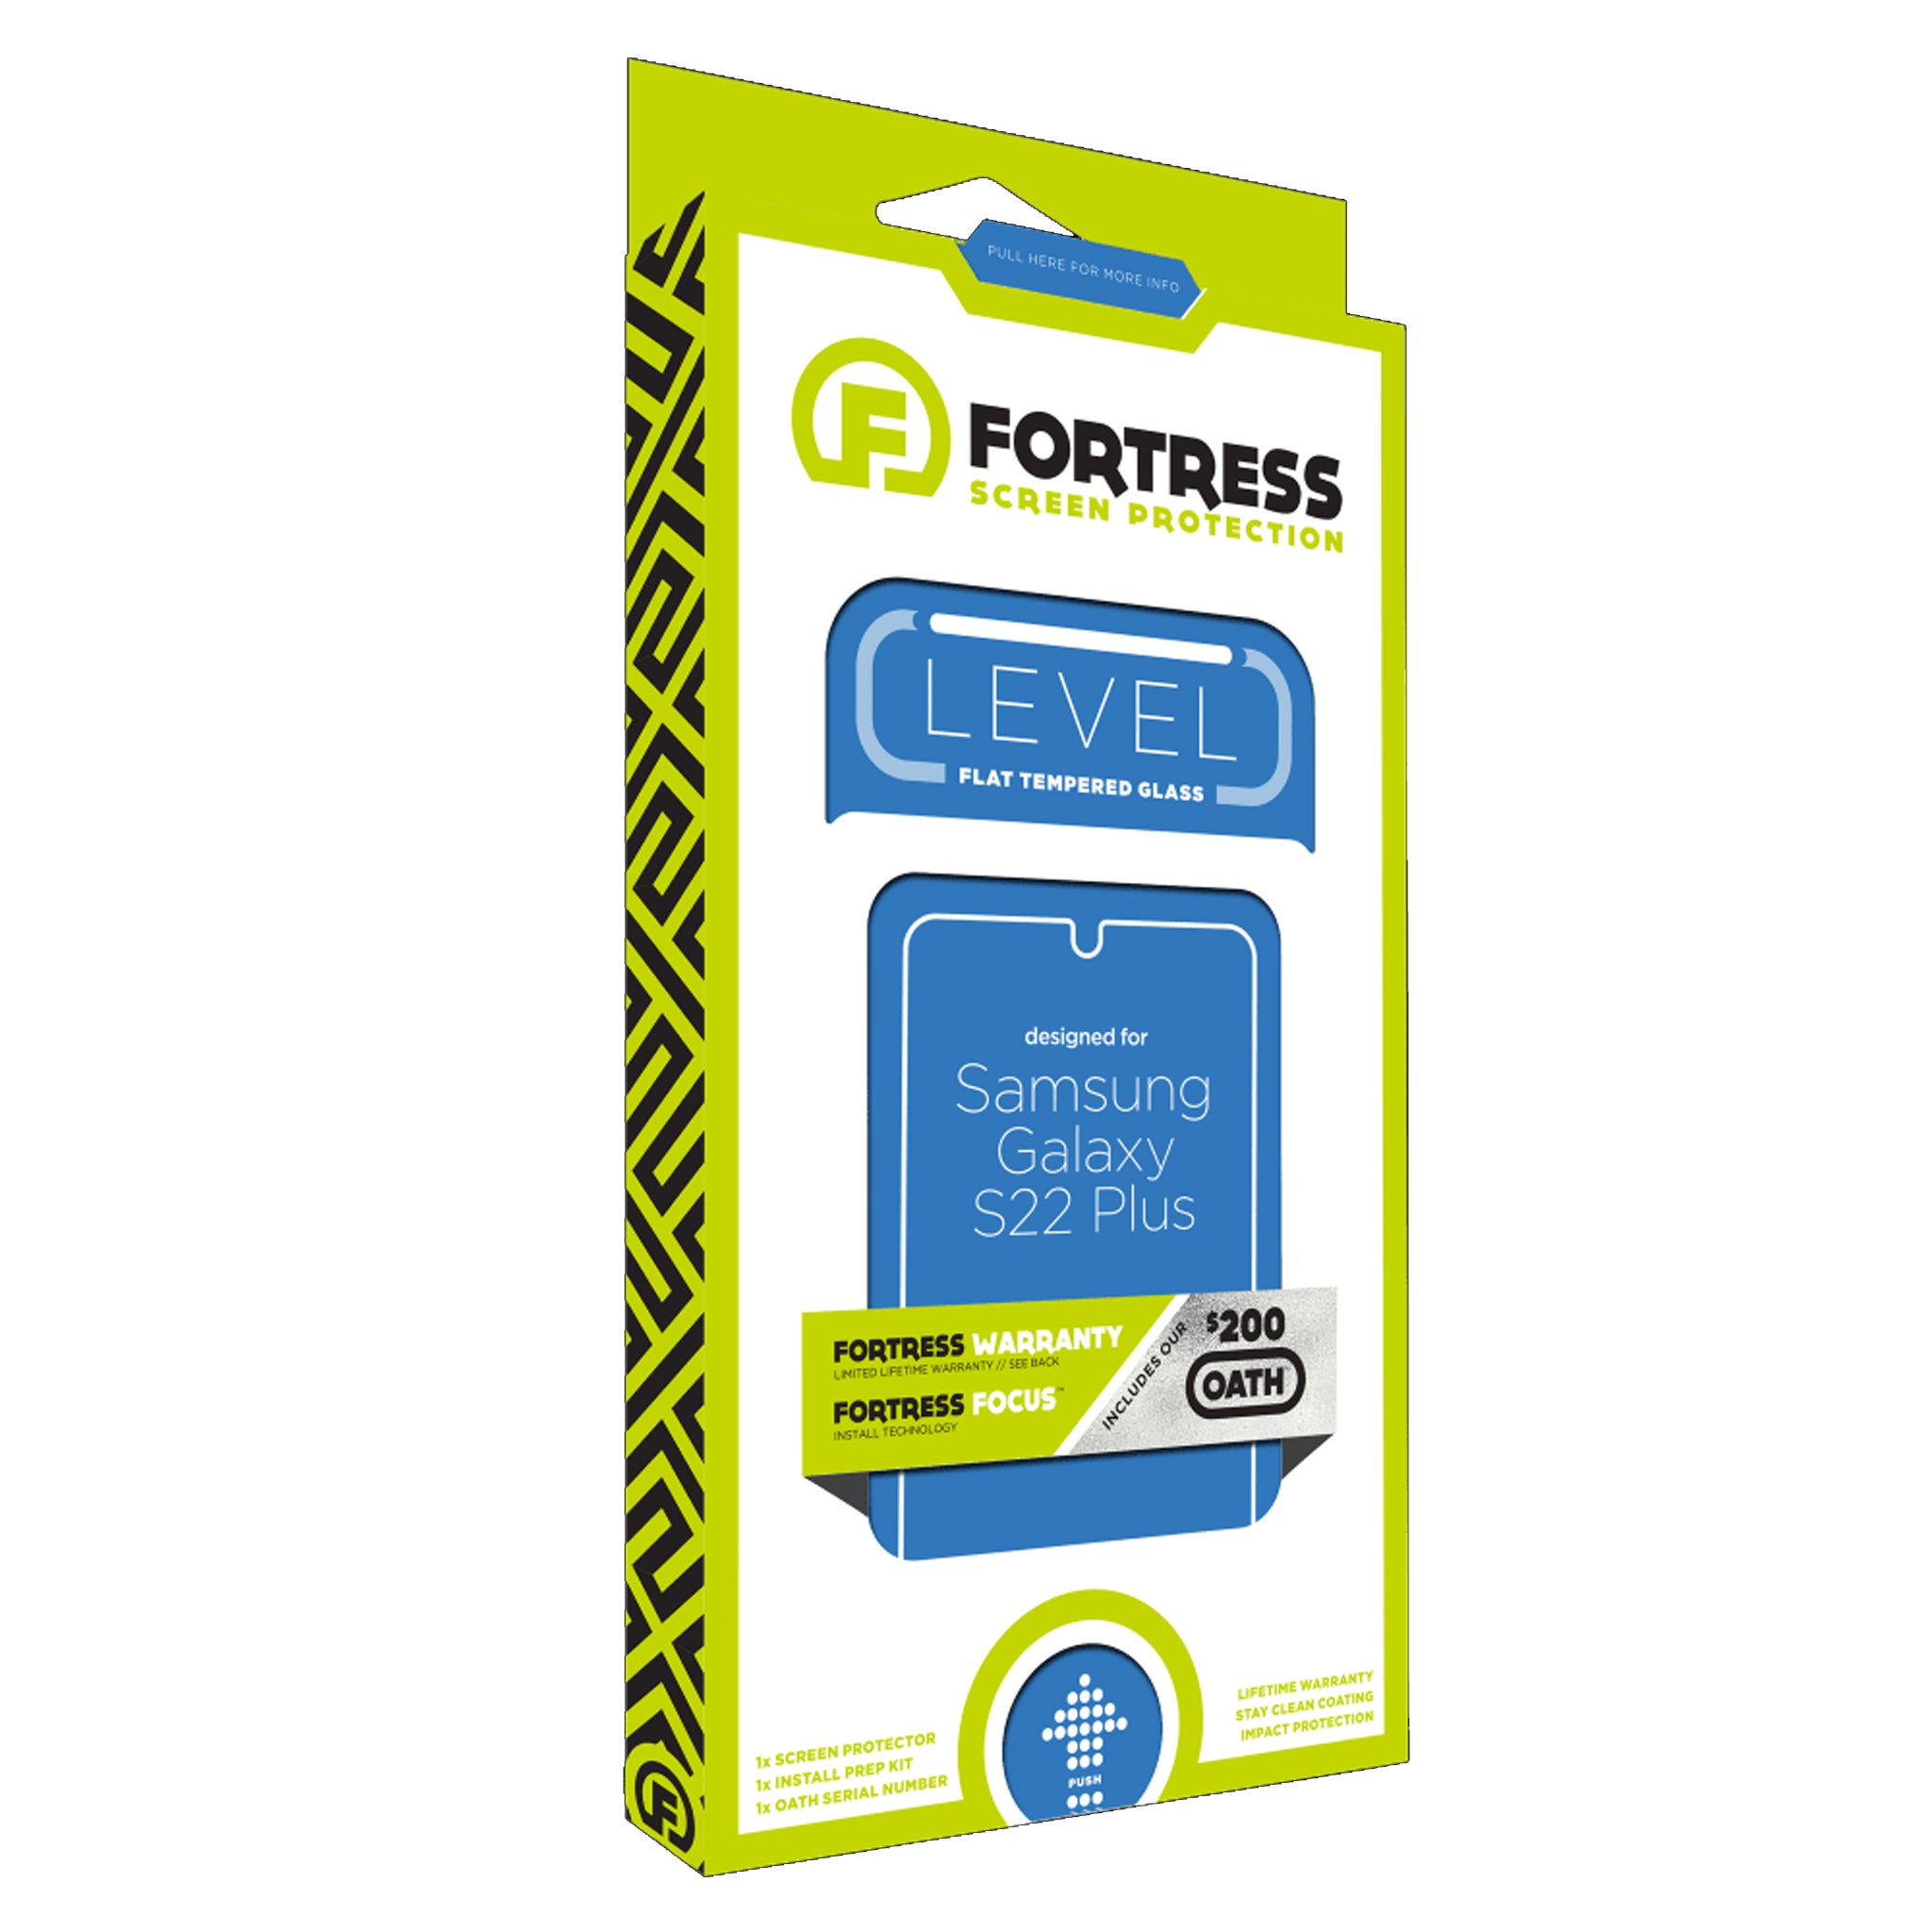 Fortress - Level Focus $200 Oath Glass Screen Protector For Samsung Galaxy S22 Plus - Clear